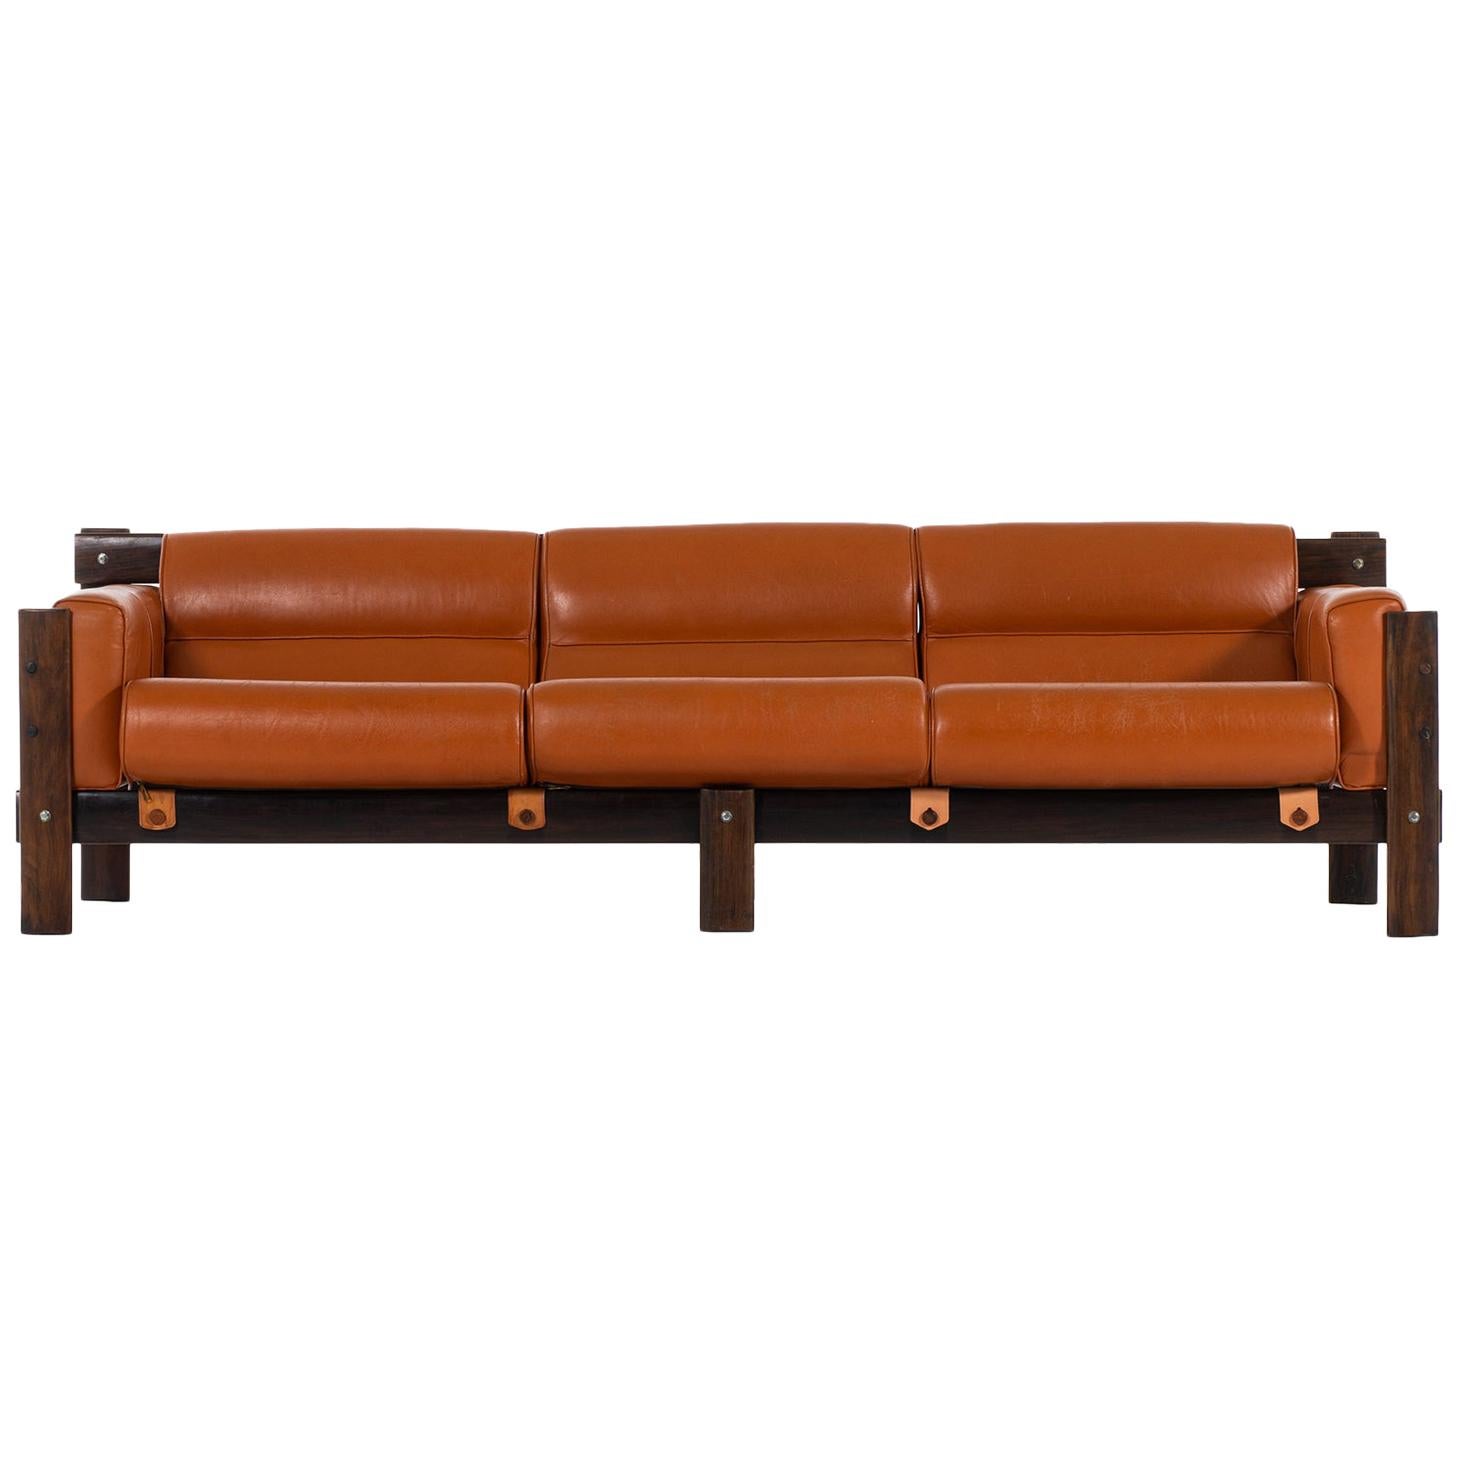 Percival Lafer Sofa in Rosewood and Leather by Lafer MP in Brazil